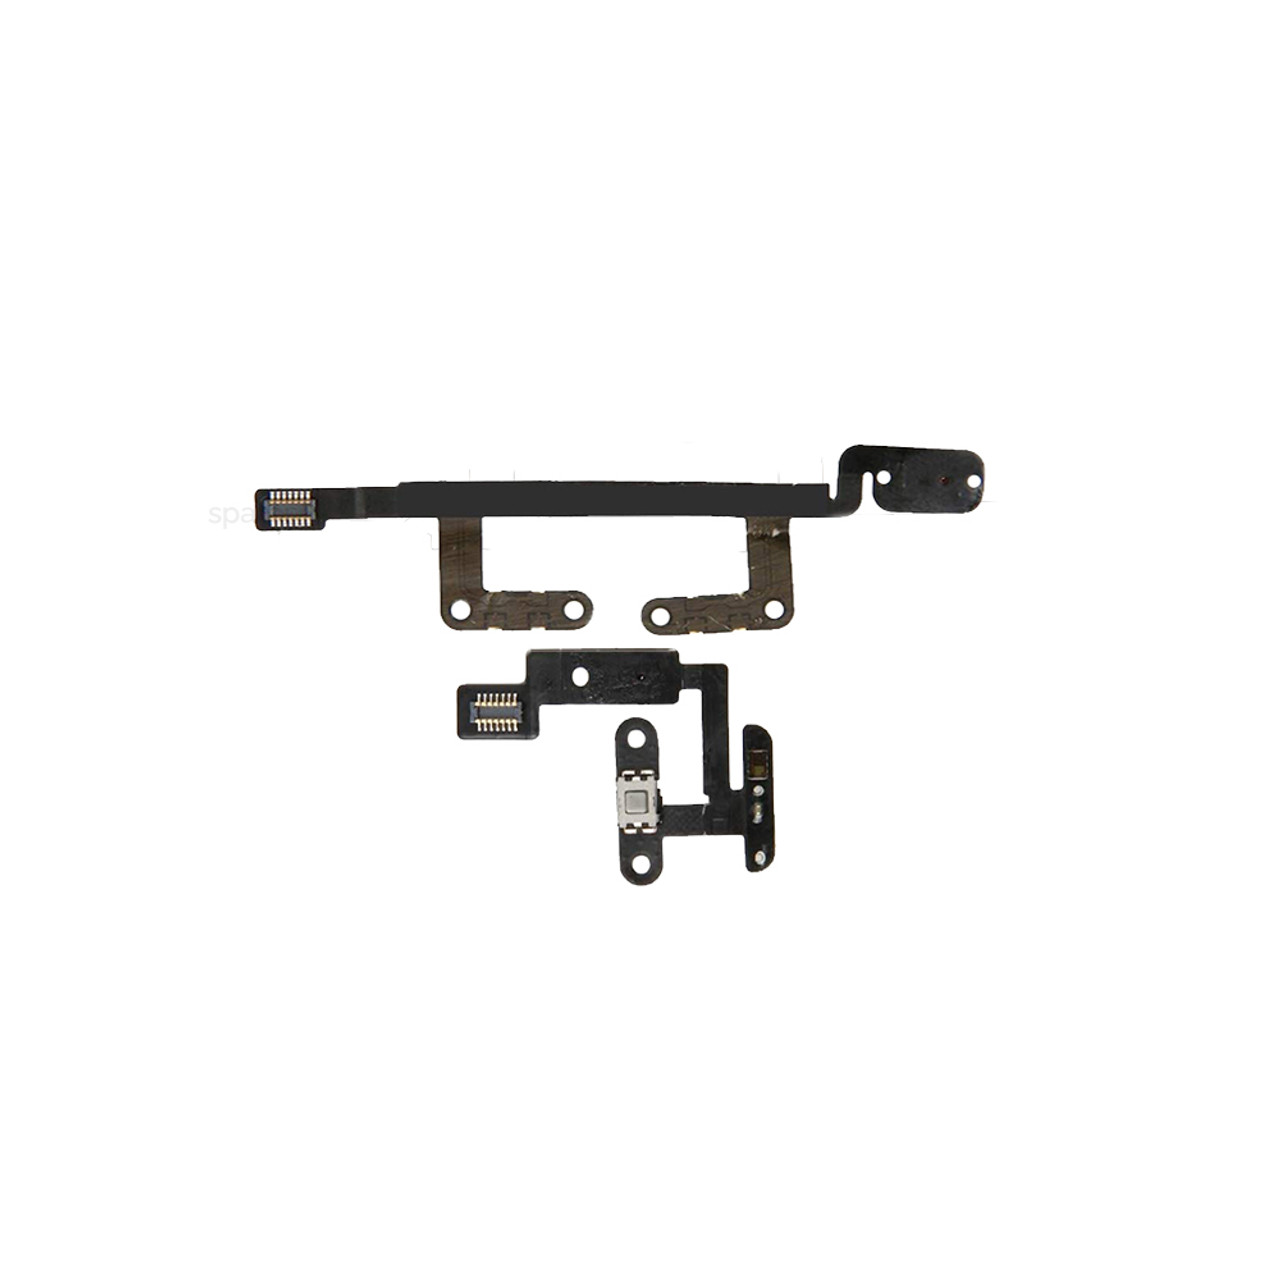 iPad Mini - Power, Volume Button & Mute Switch Flex Cable Replacement